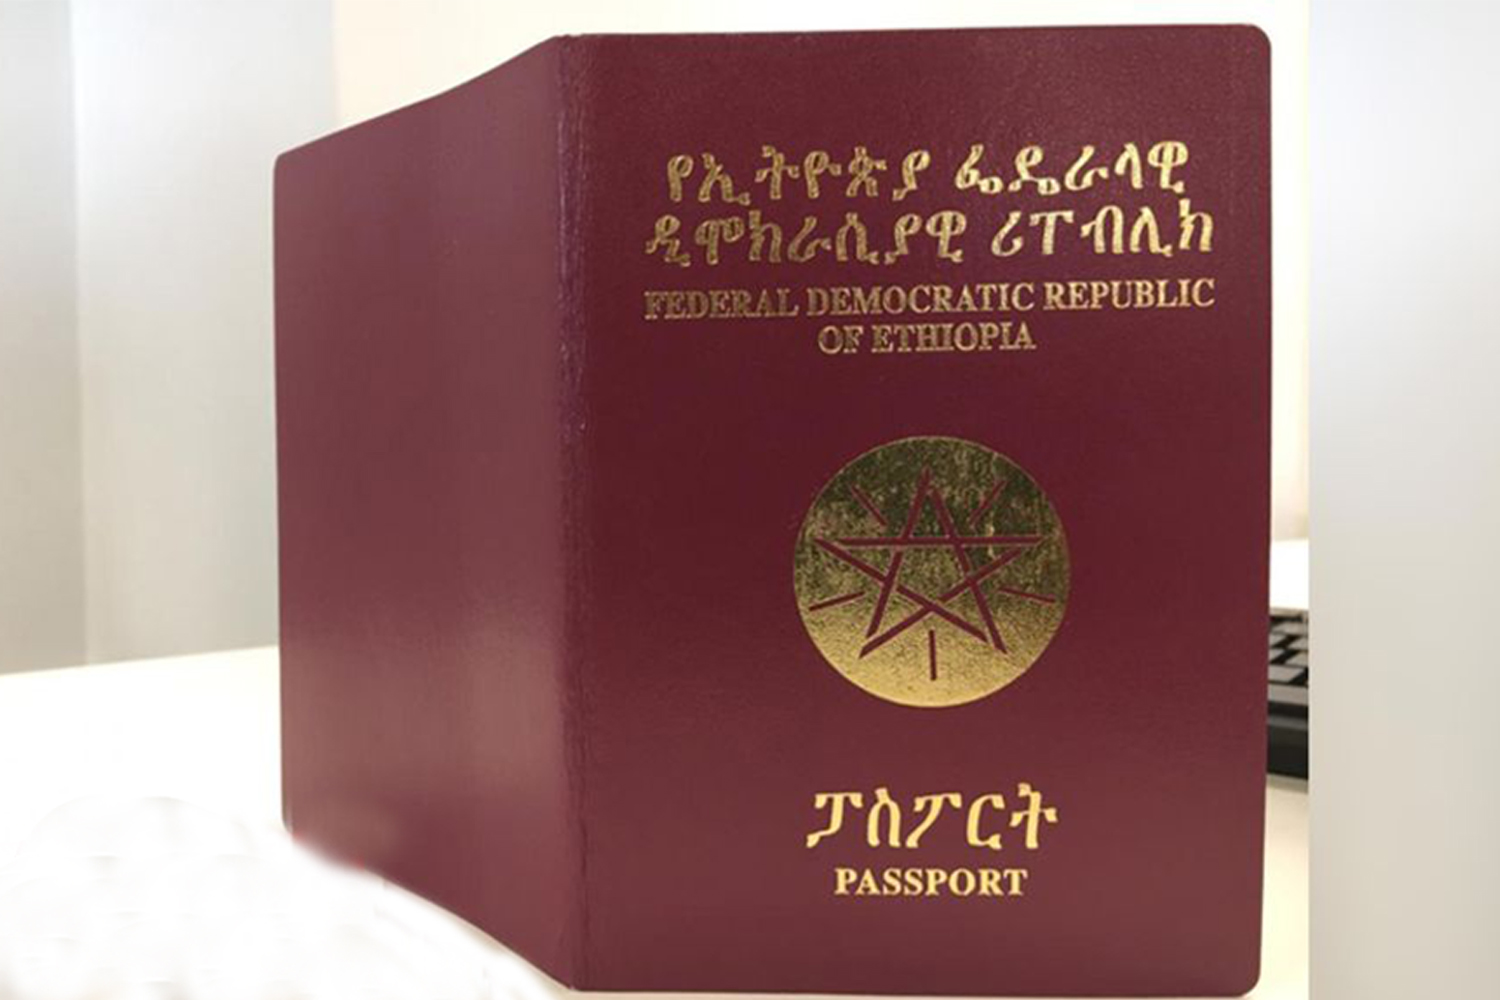 Vietnam Visa Extension And Visa Renewal For Ethiopia Passport Holders 2022 – Procedures, Fees And Documents To Extend Business Visa & Tourist Visa